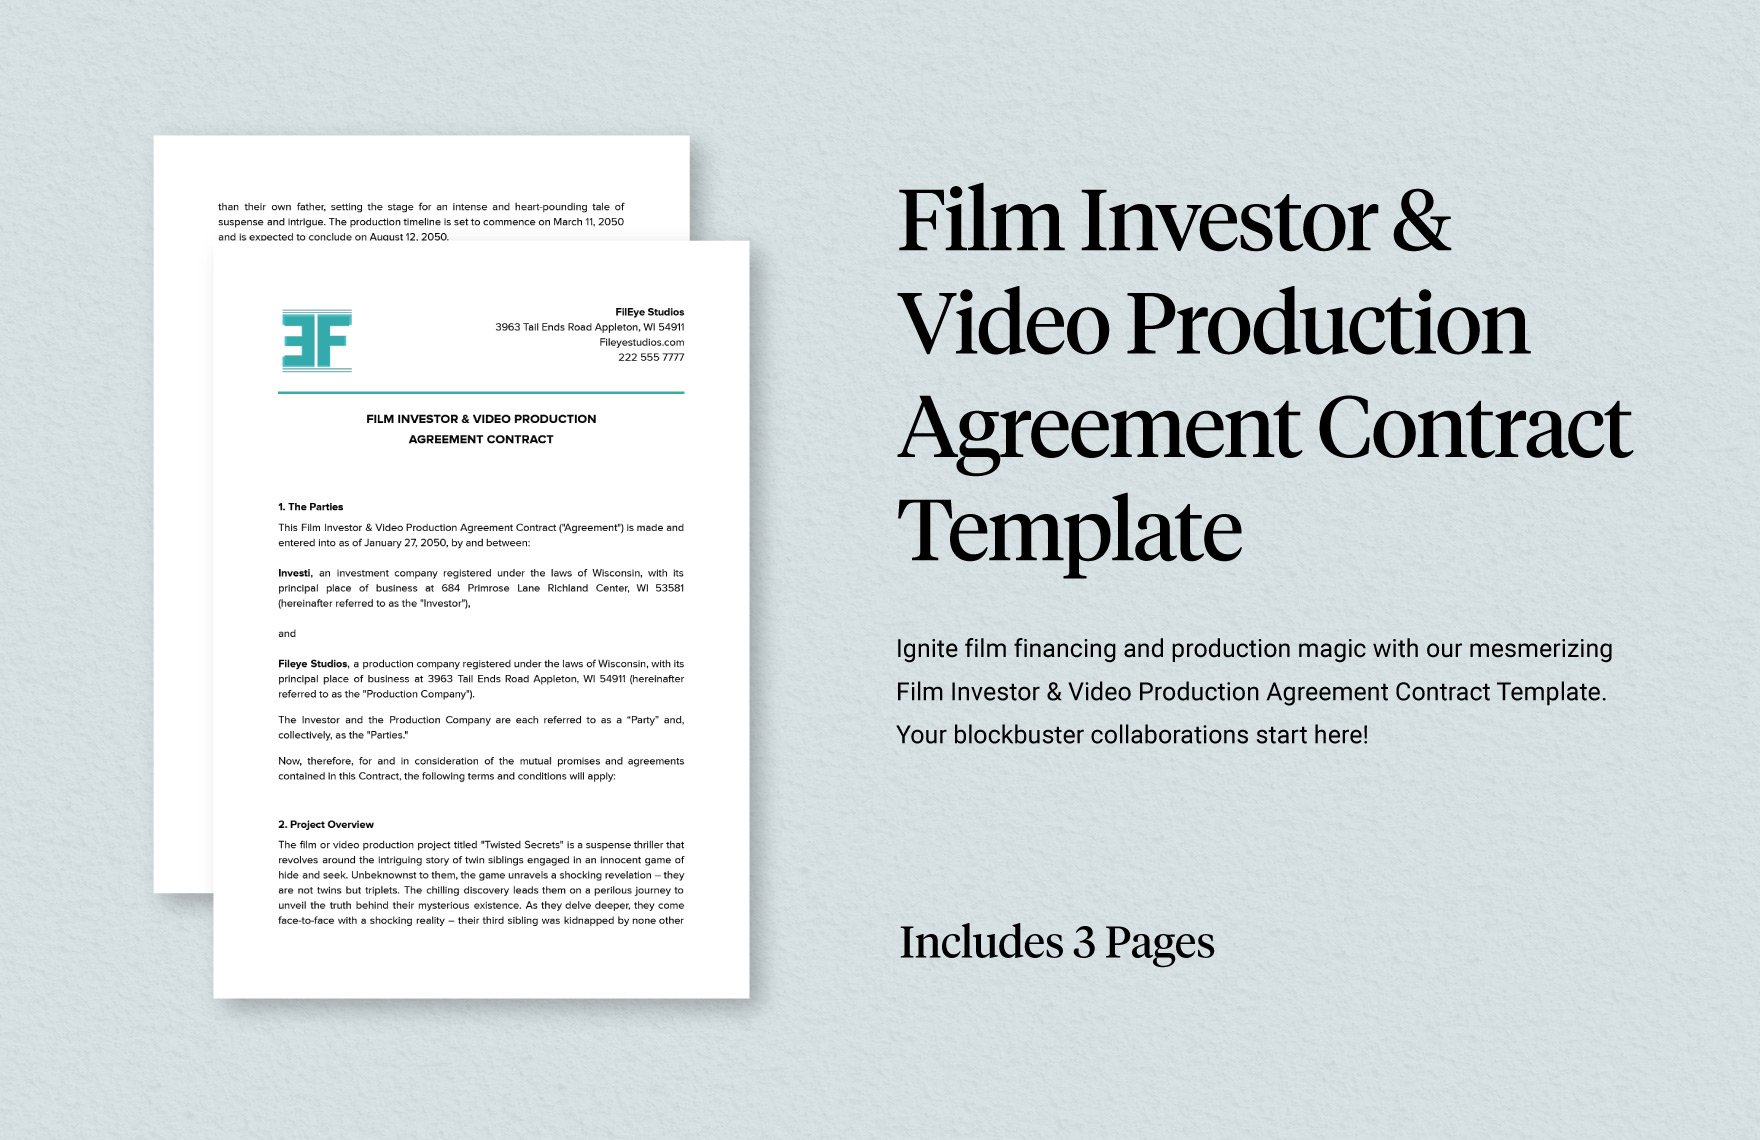 Film Investor & Video Production Agreement Contract Template